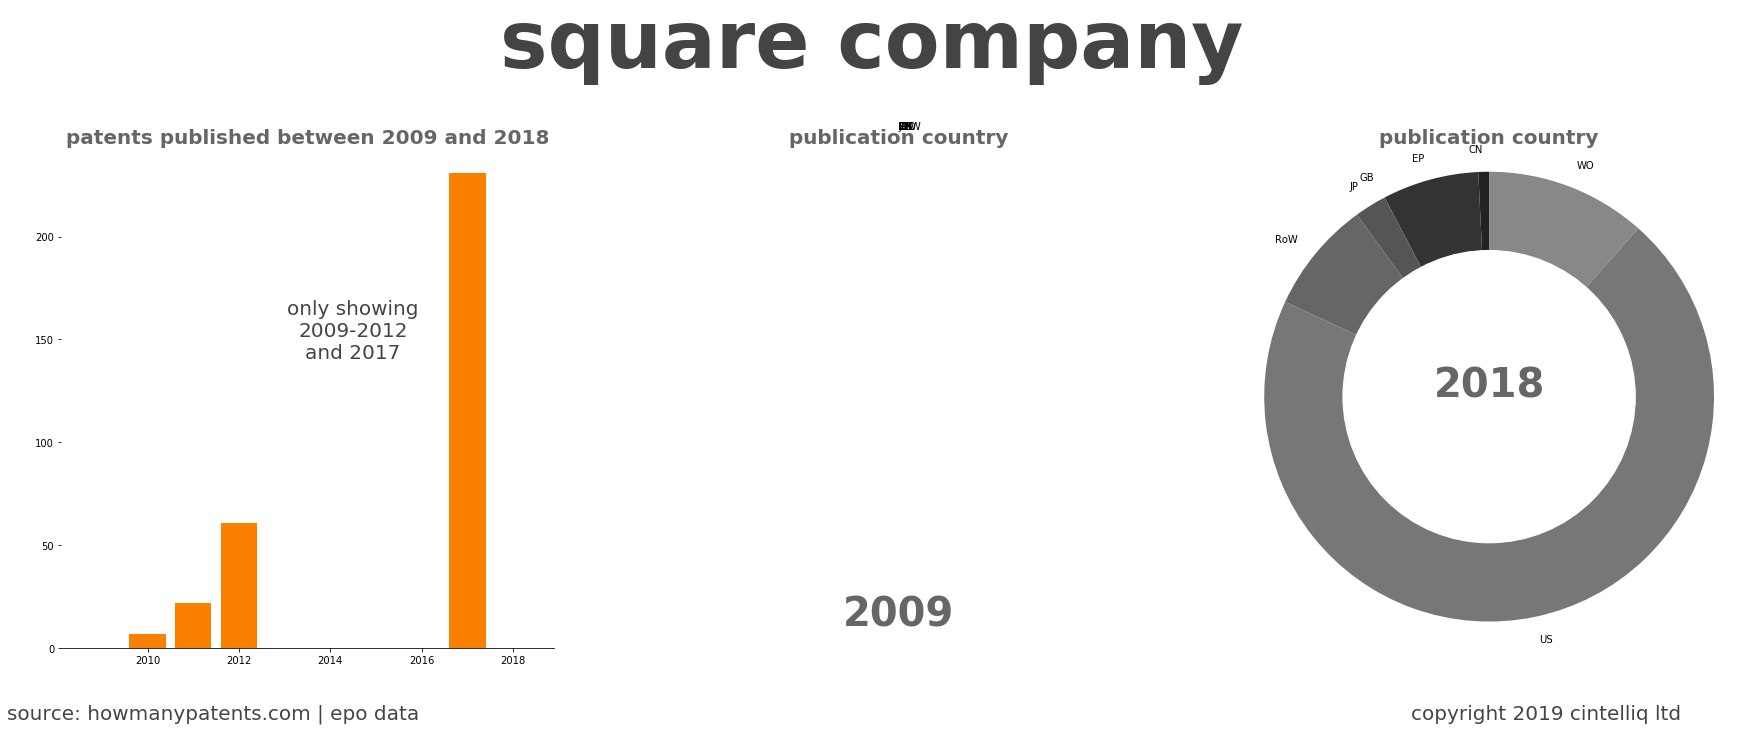 summary of patents for Square Company